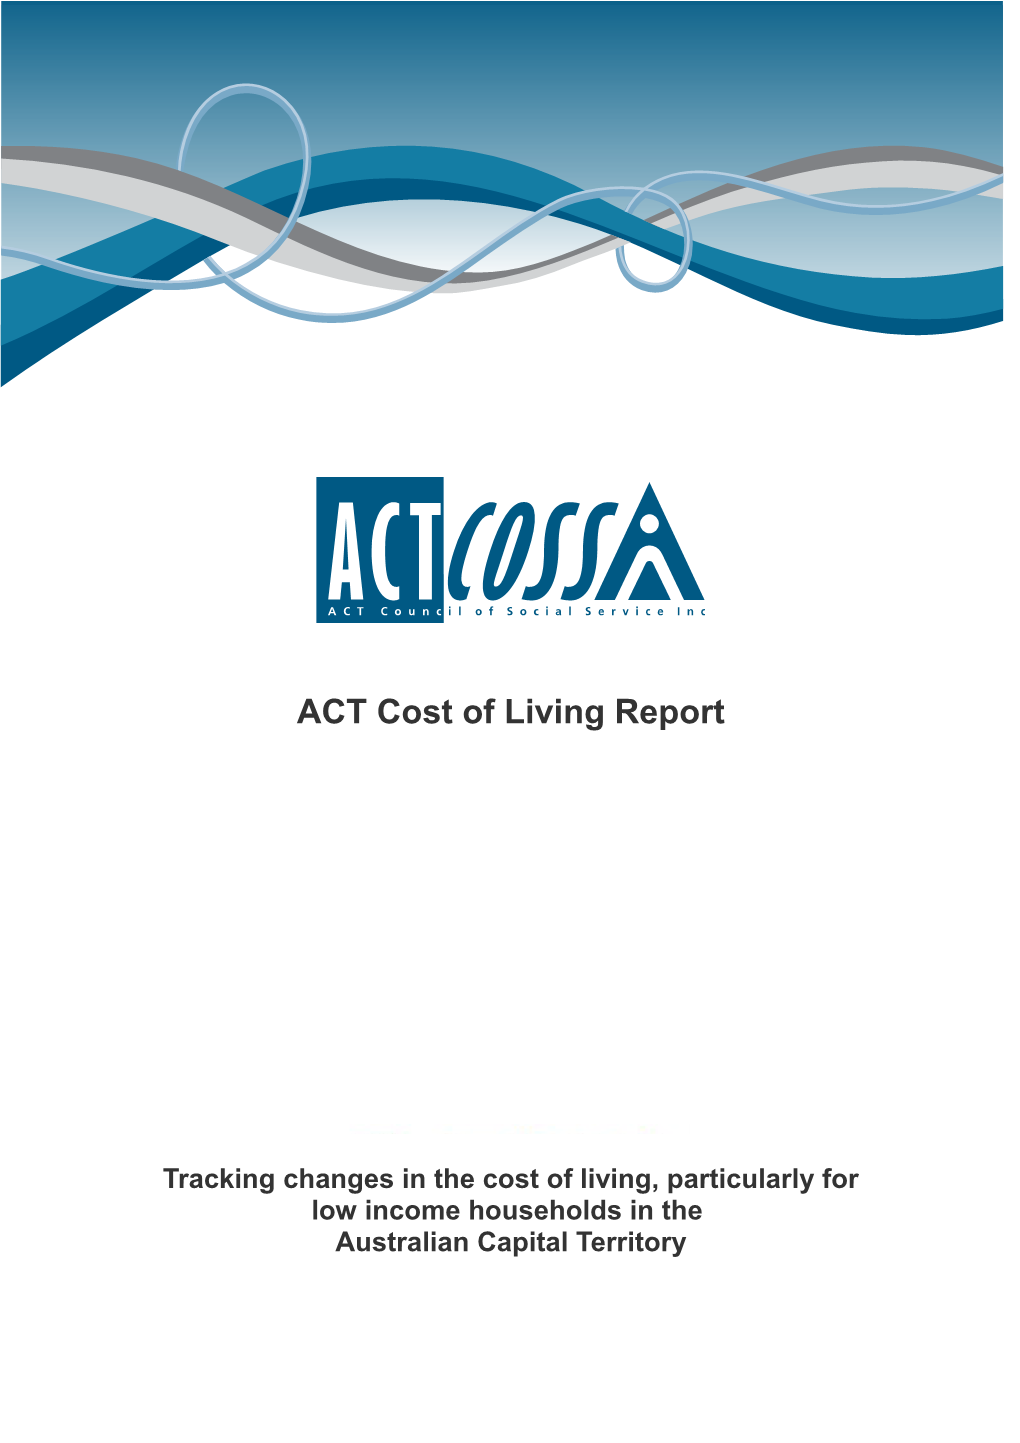 ACT Cost of Living Report 2018